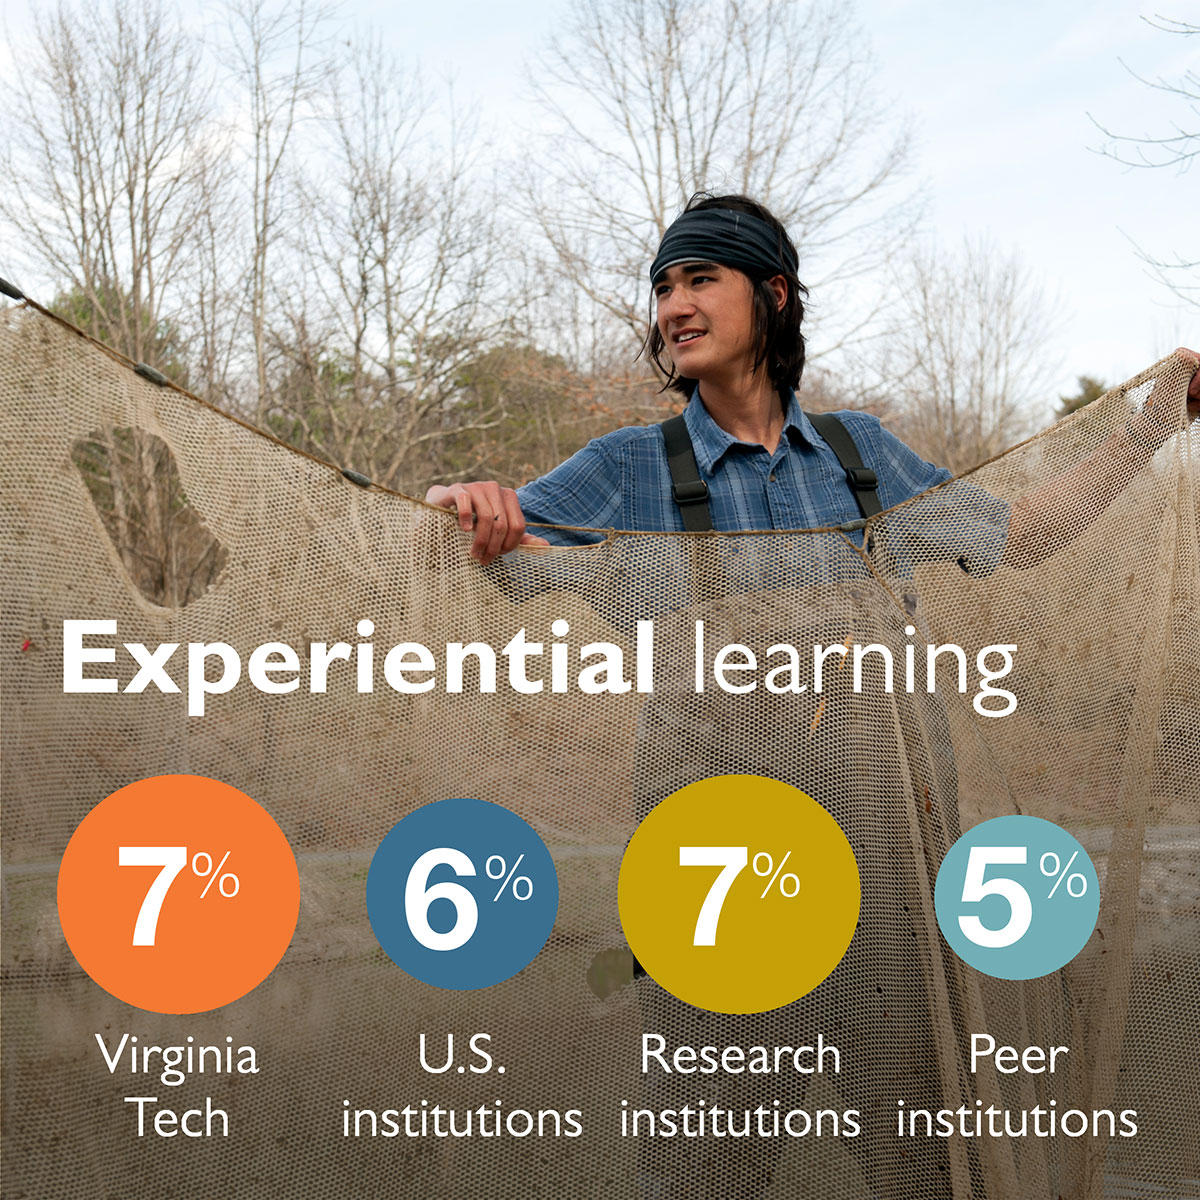 Experiential learning